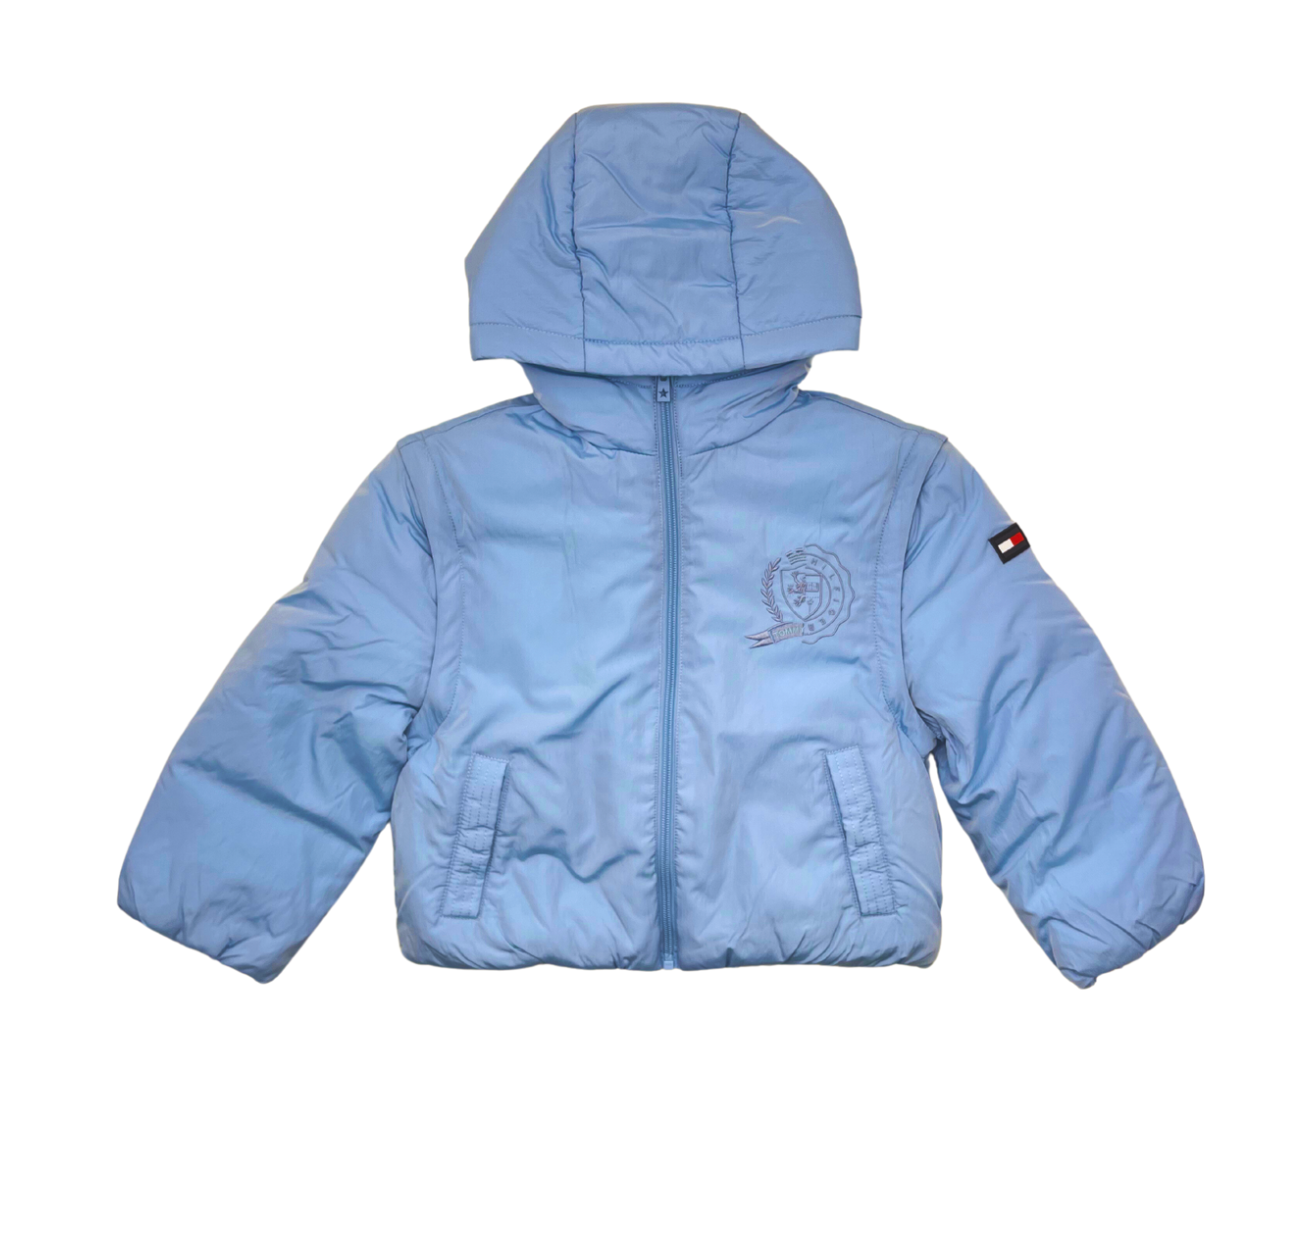 TOMMY HILFIGER - Puffer jacket with detachable sleeves - 6 years old